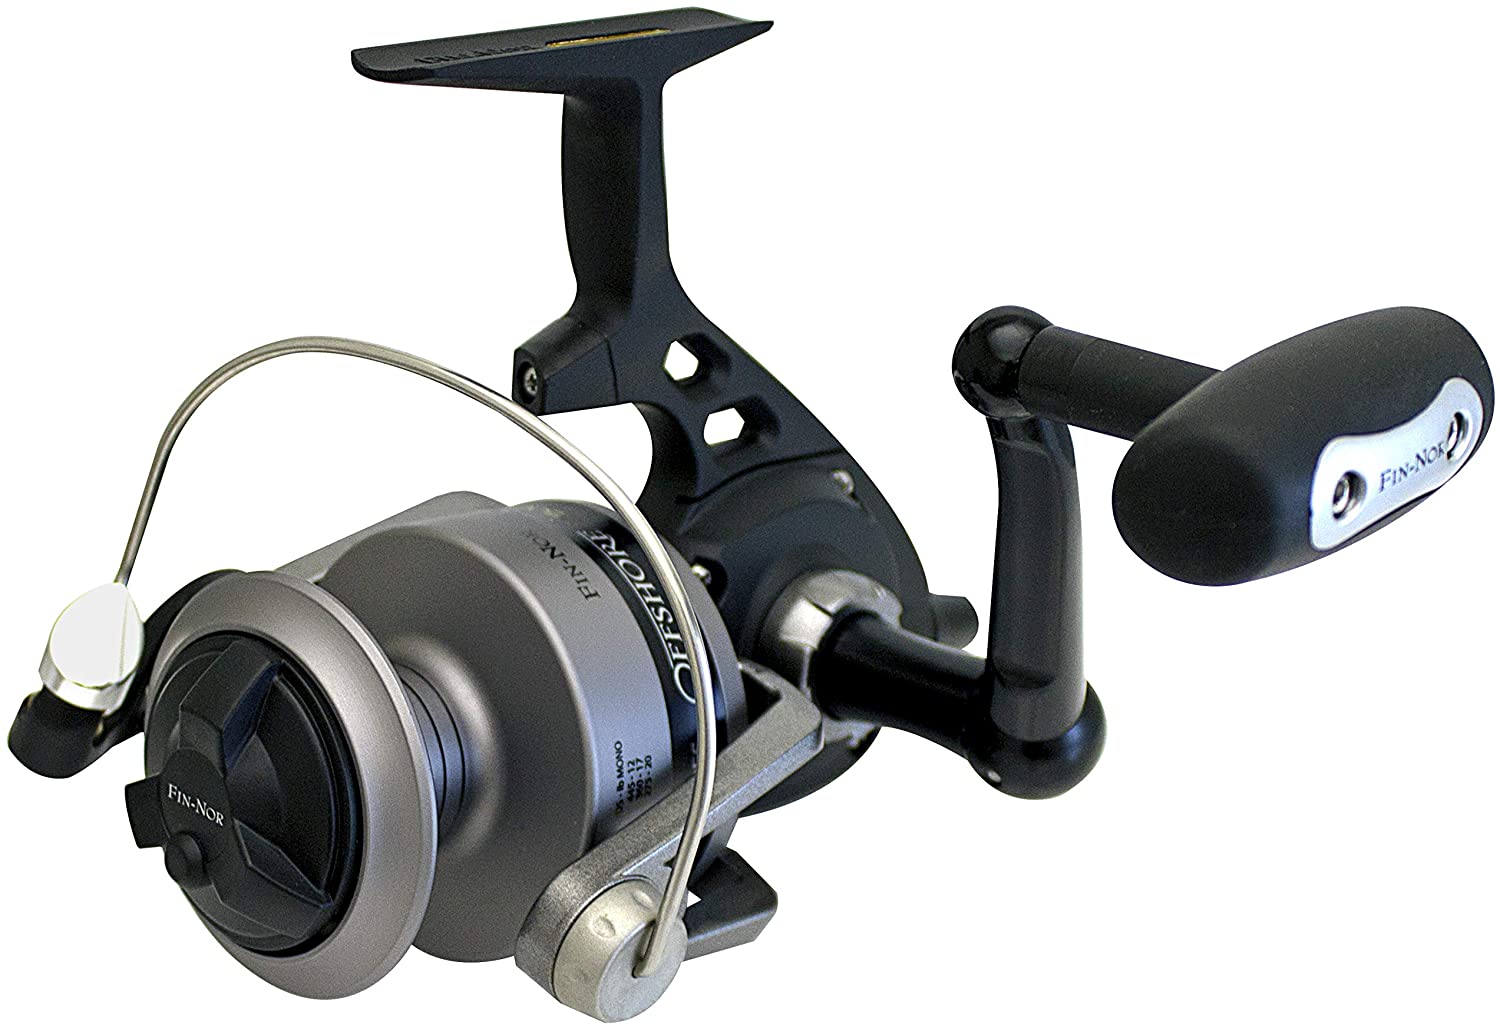 Fin-Nor Offshore OFS 5500A Reel